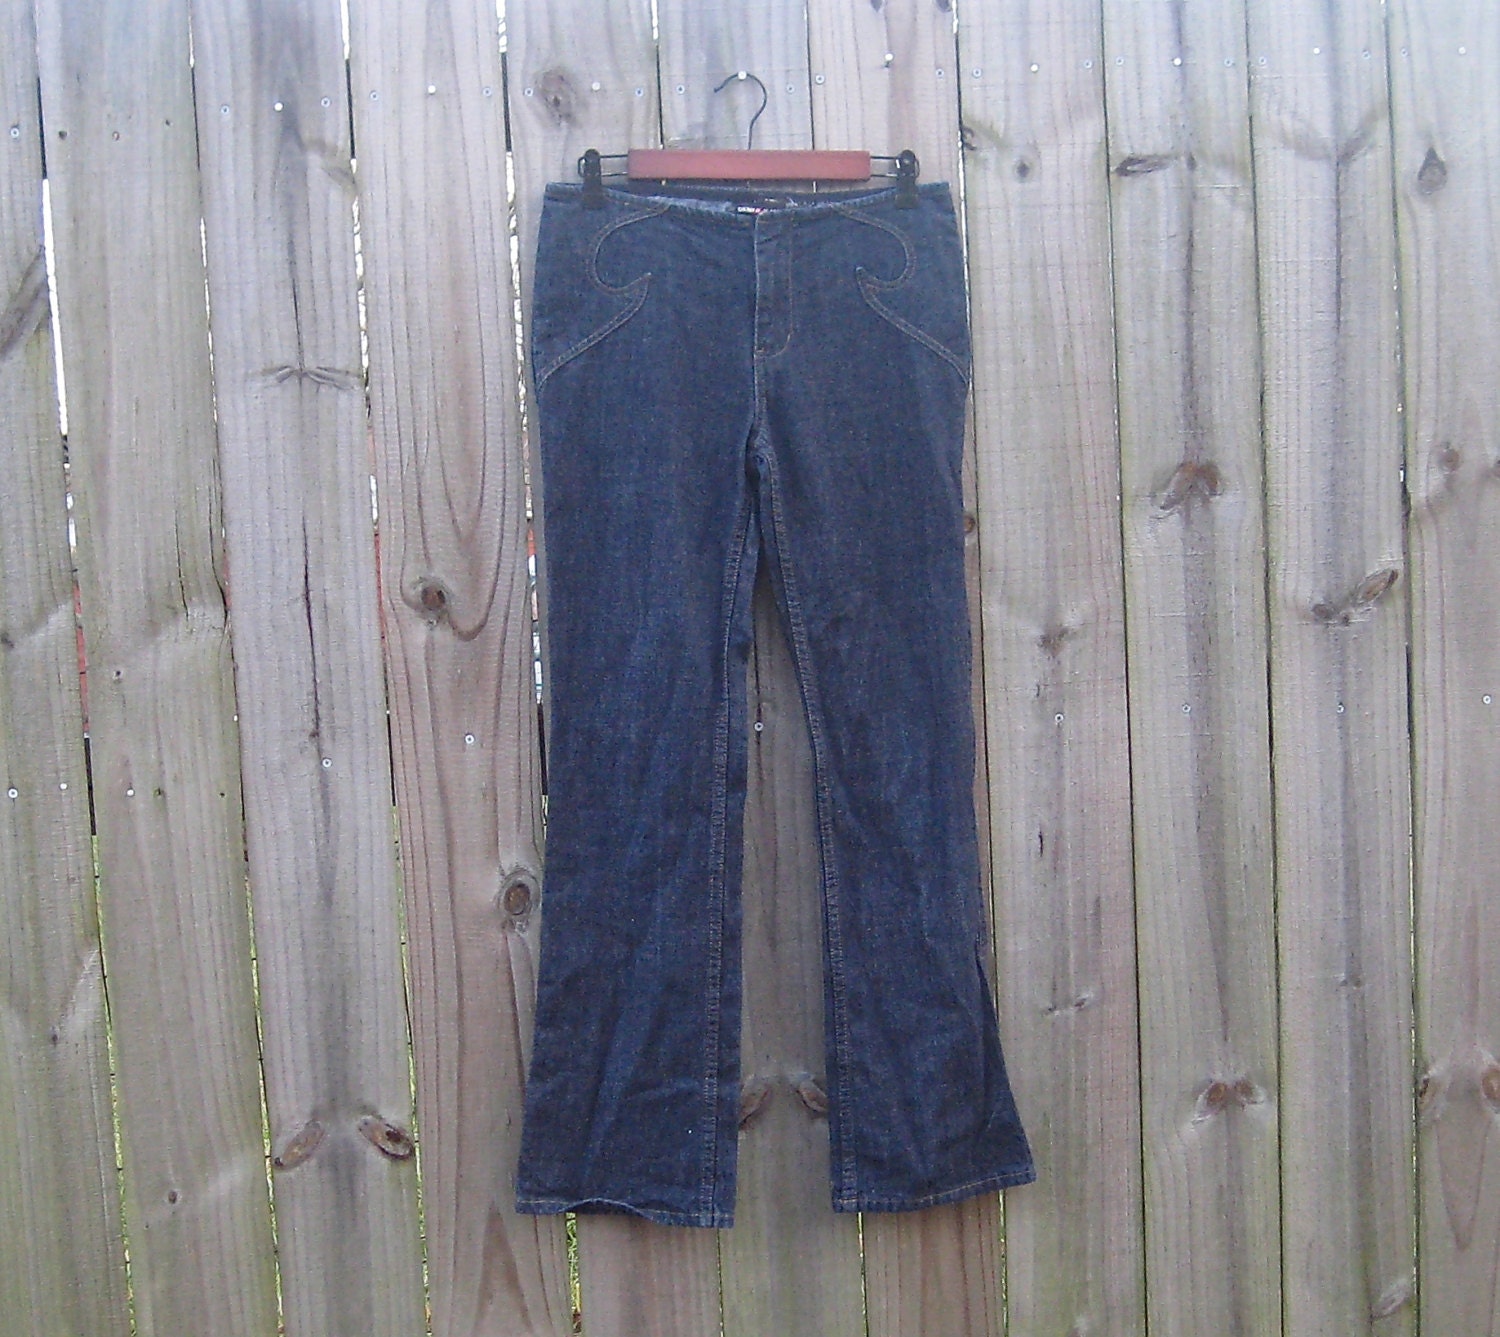 S Small Vintage 90s DKNY Jeans Low Rise Raver EDM Sexy Dark